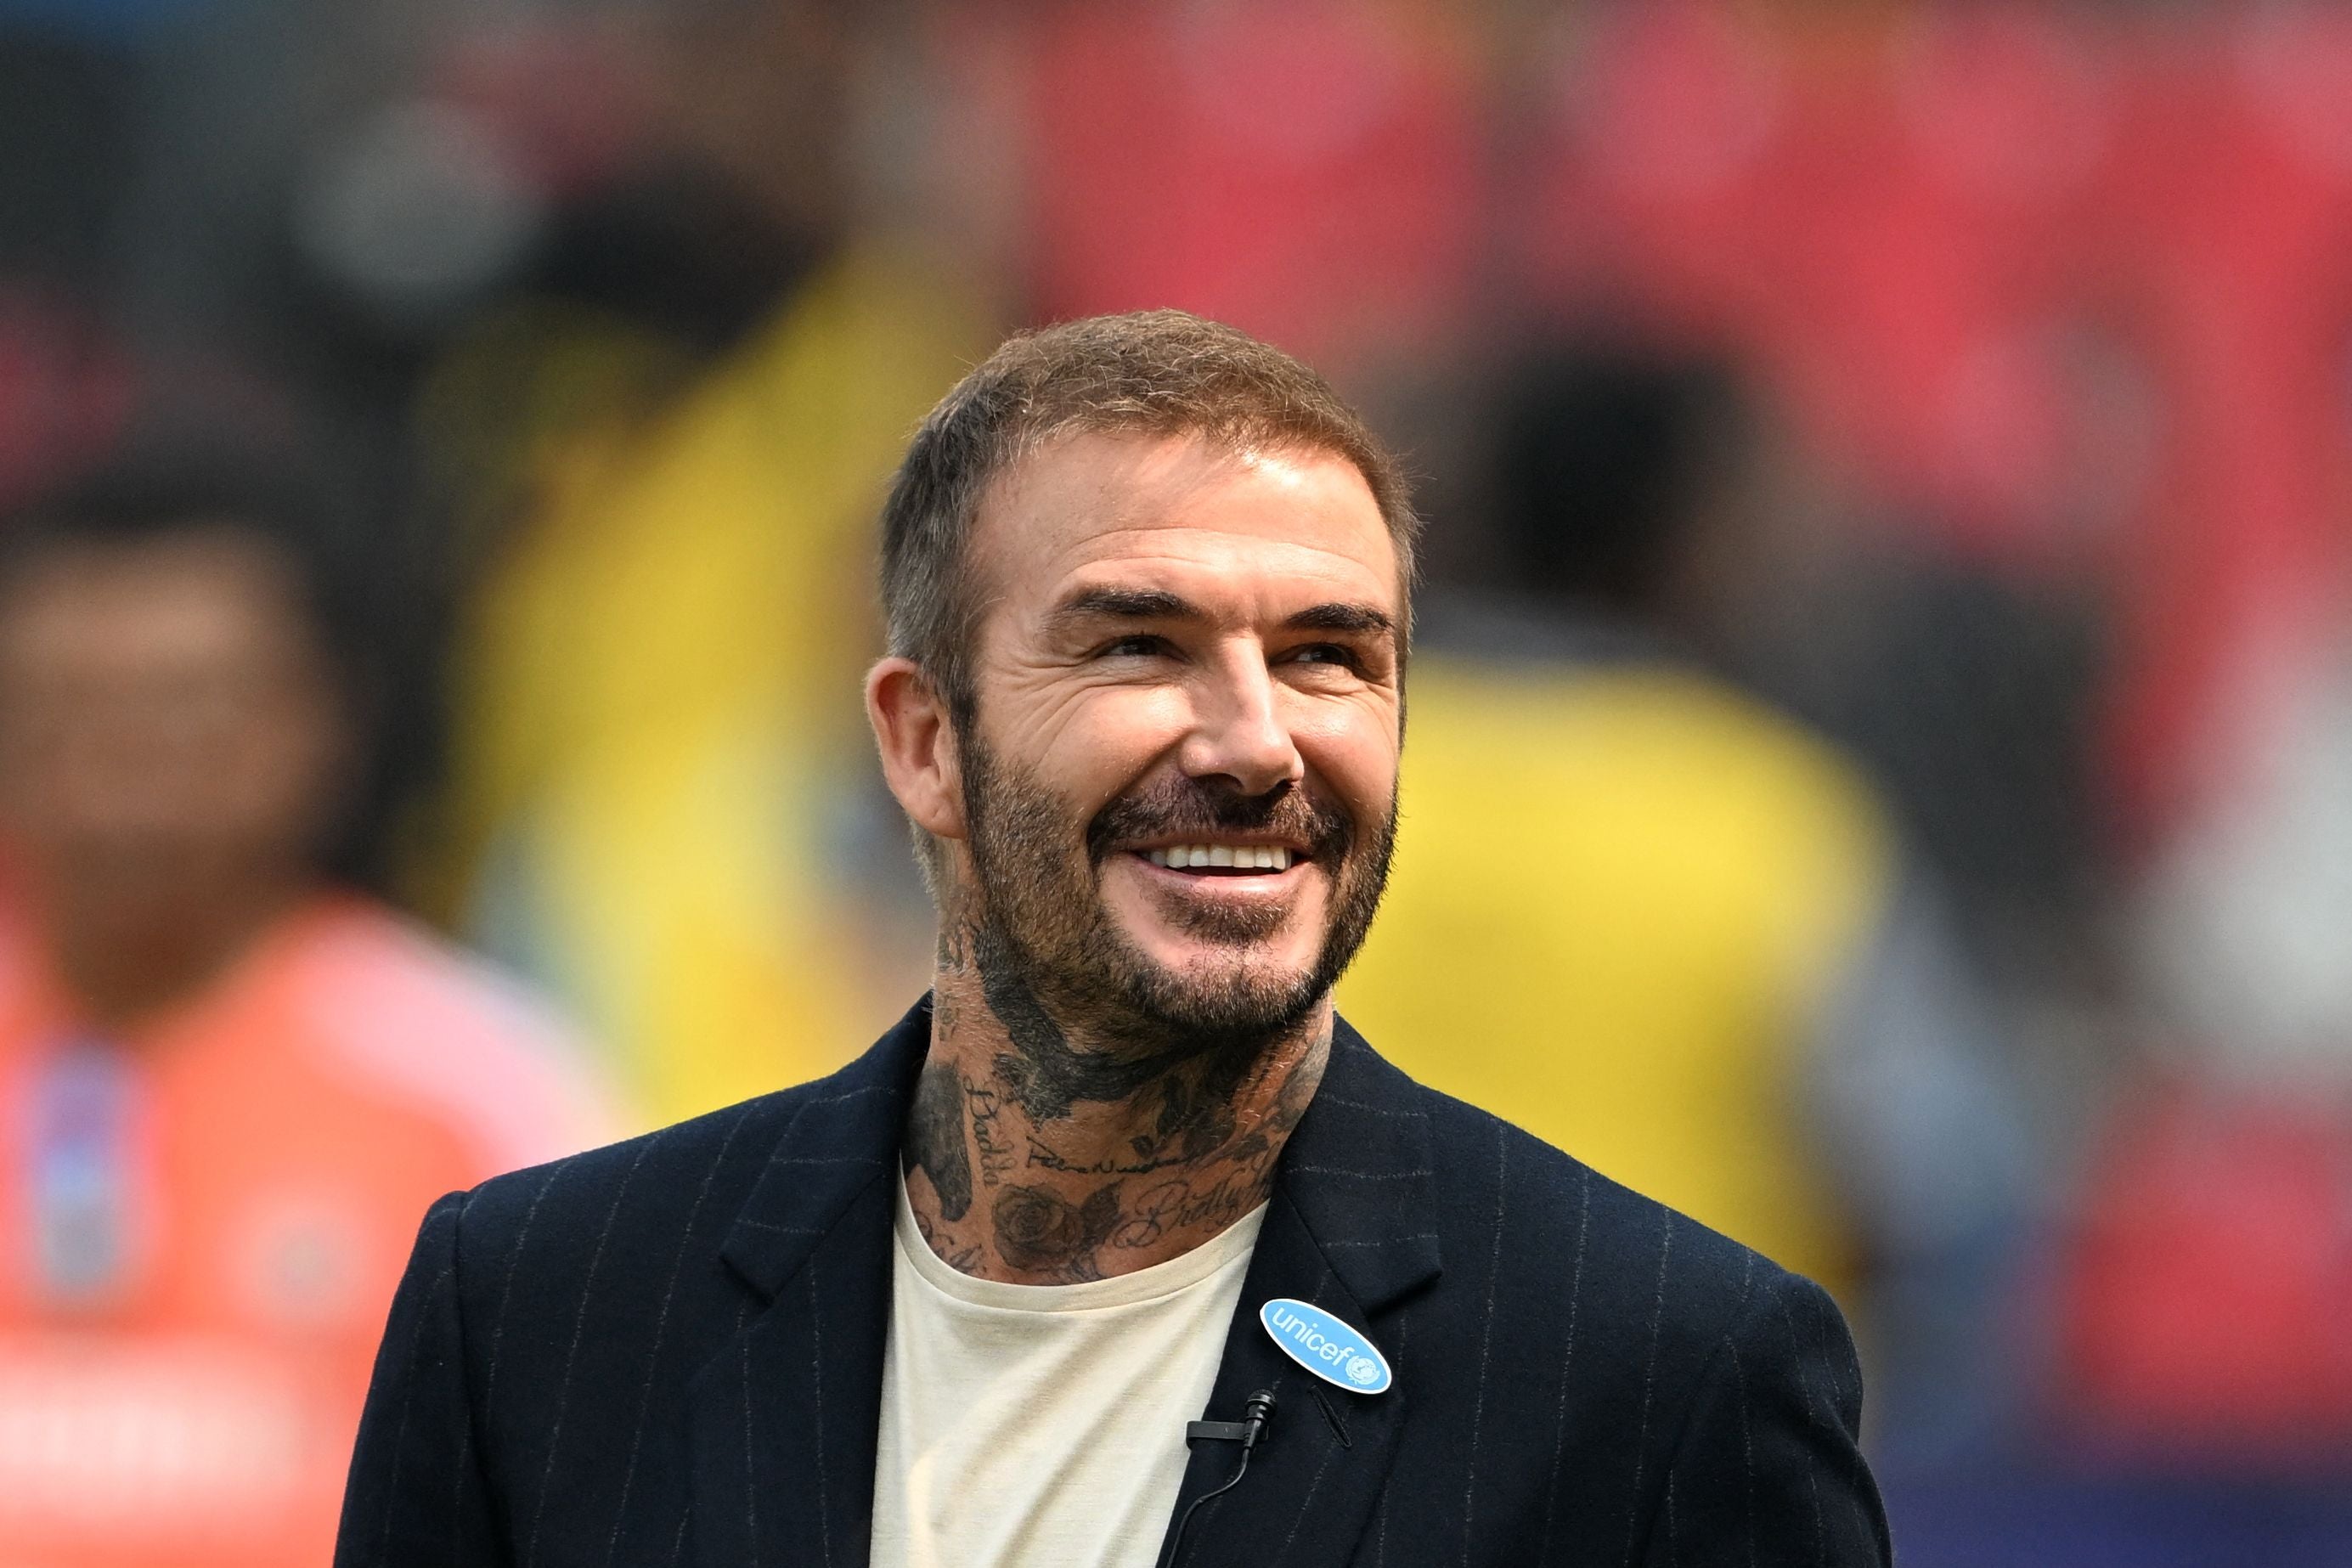 David Beckham says the moment his father congratulated him – ‘the first time he turned around to me and said: “You’ve made it, boy”’ – was after a friendly against France in which he didn’t score